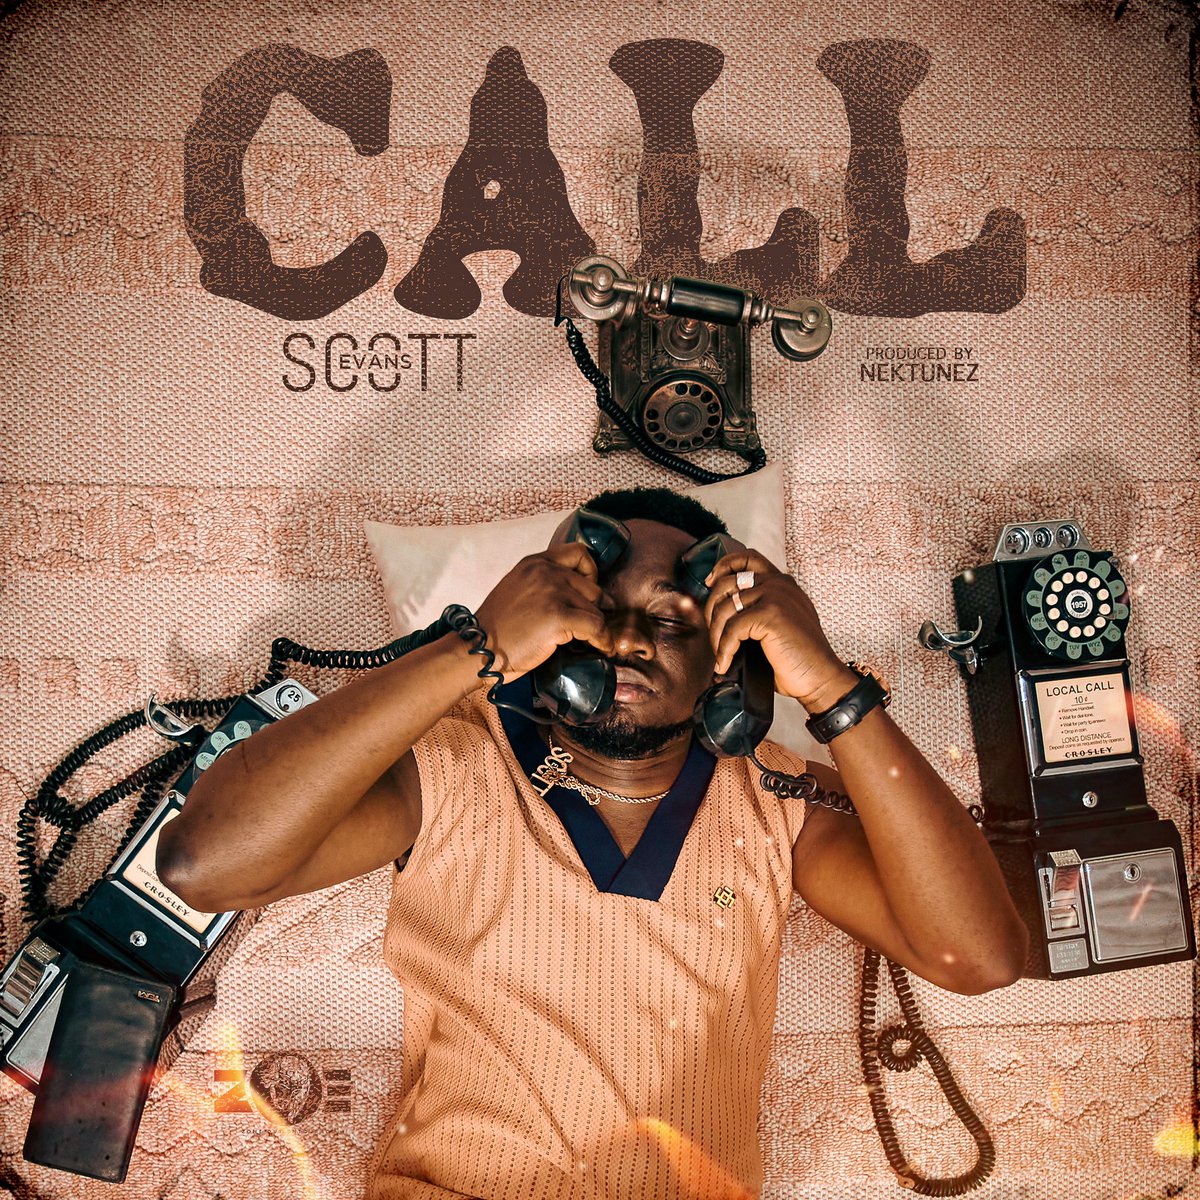 I’m super Excited about this new song 🎶 “CALL” Produced by @nektunez Shot by @kwakumovz Edited by @dennistemituro Art 🖼️ by @cc_pixart Gimme a share if you’re excited 😊 .. #Call #newmusic #christian #AfroGospel #gospel #demol #Wizkid